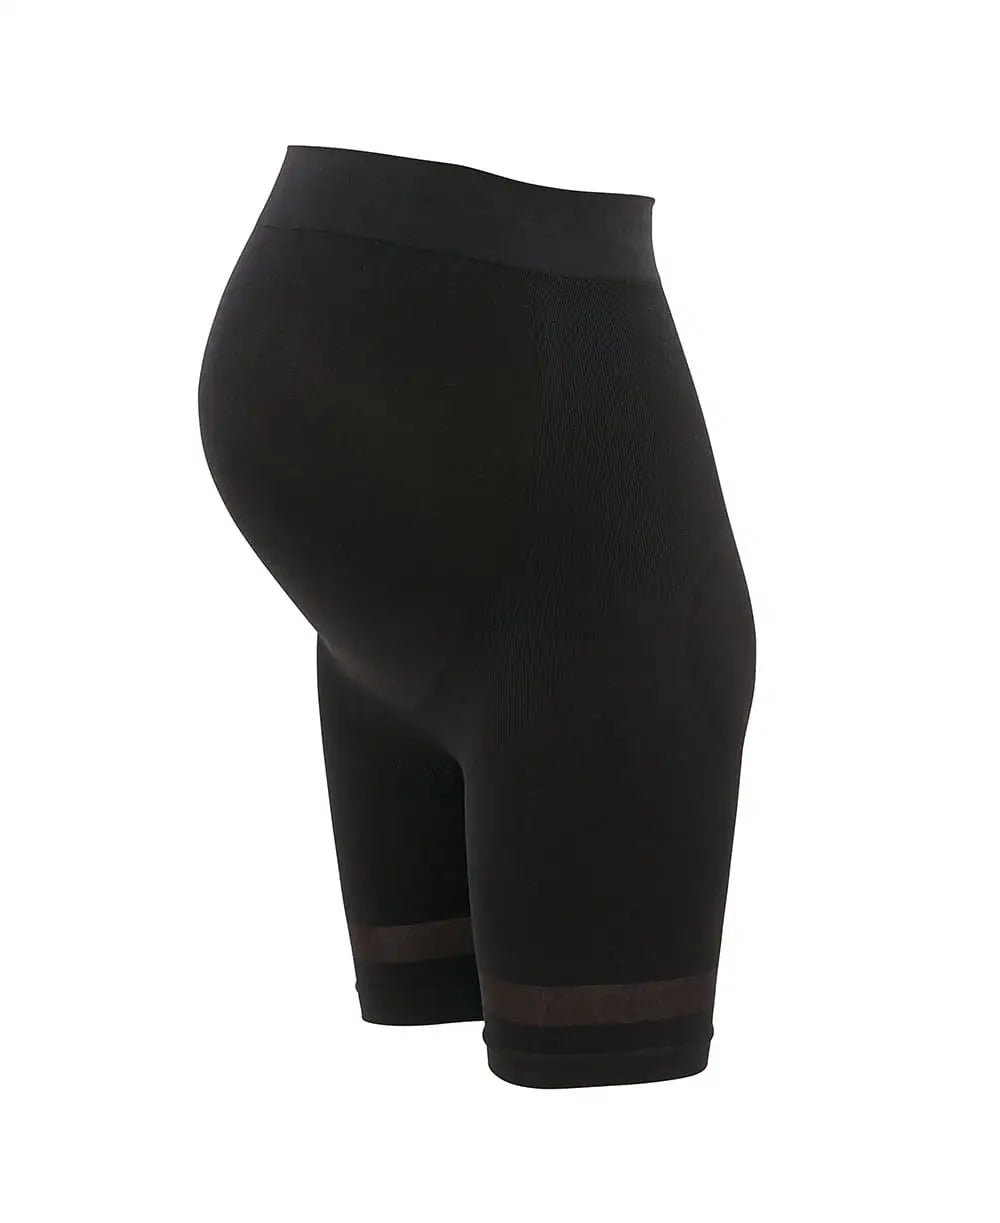 Sport and maternity panty Woma black - Legging